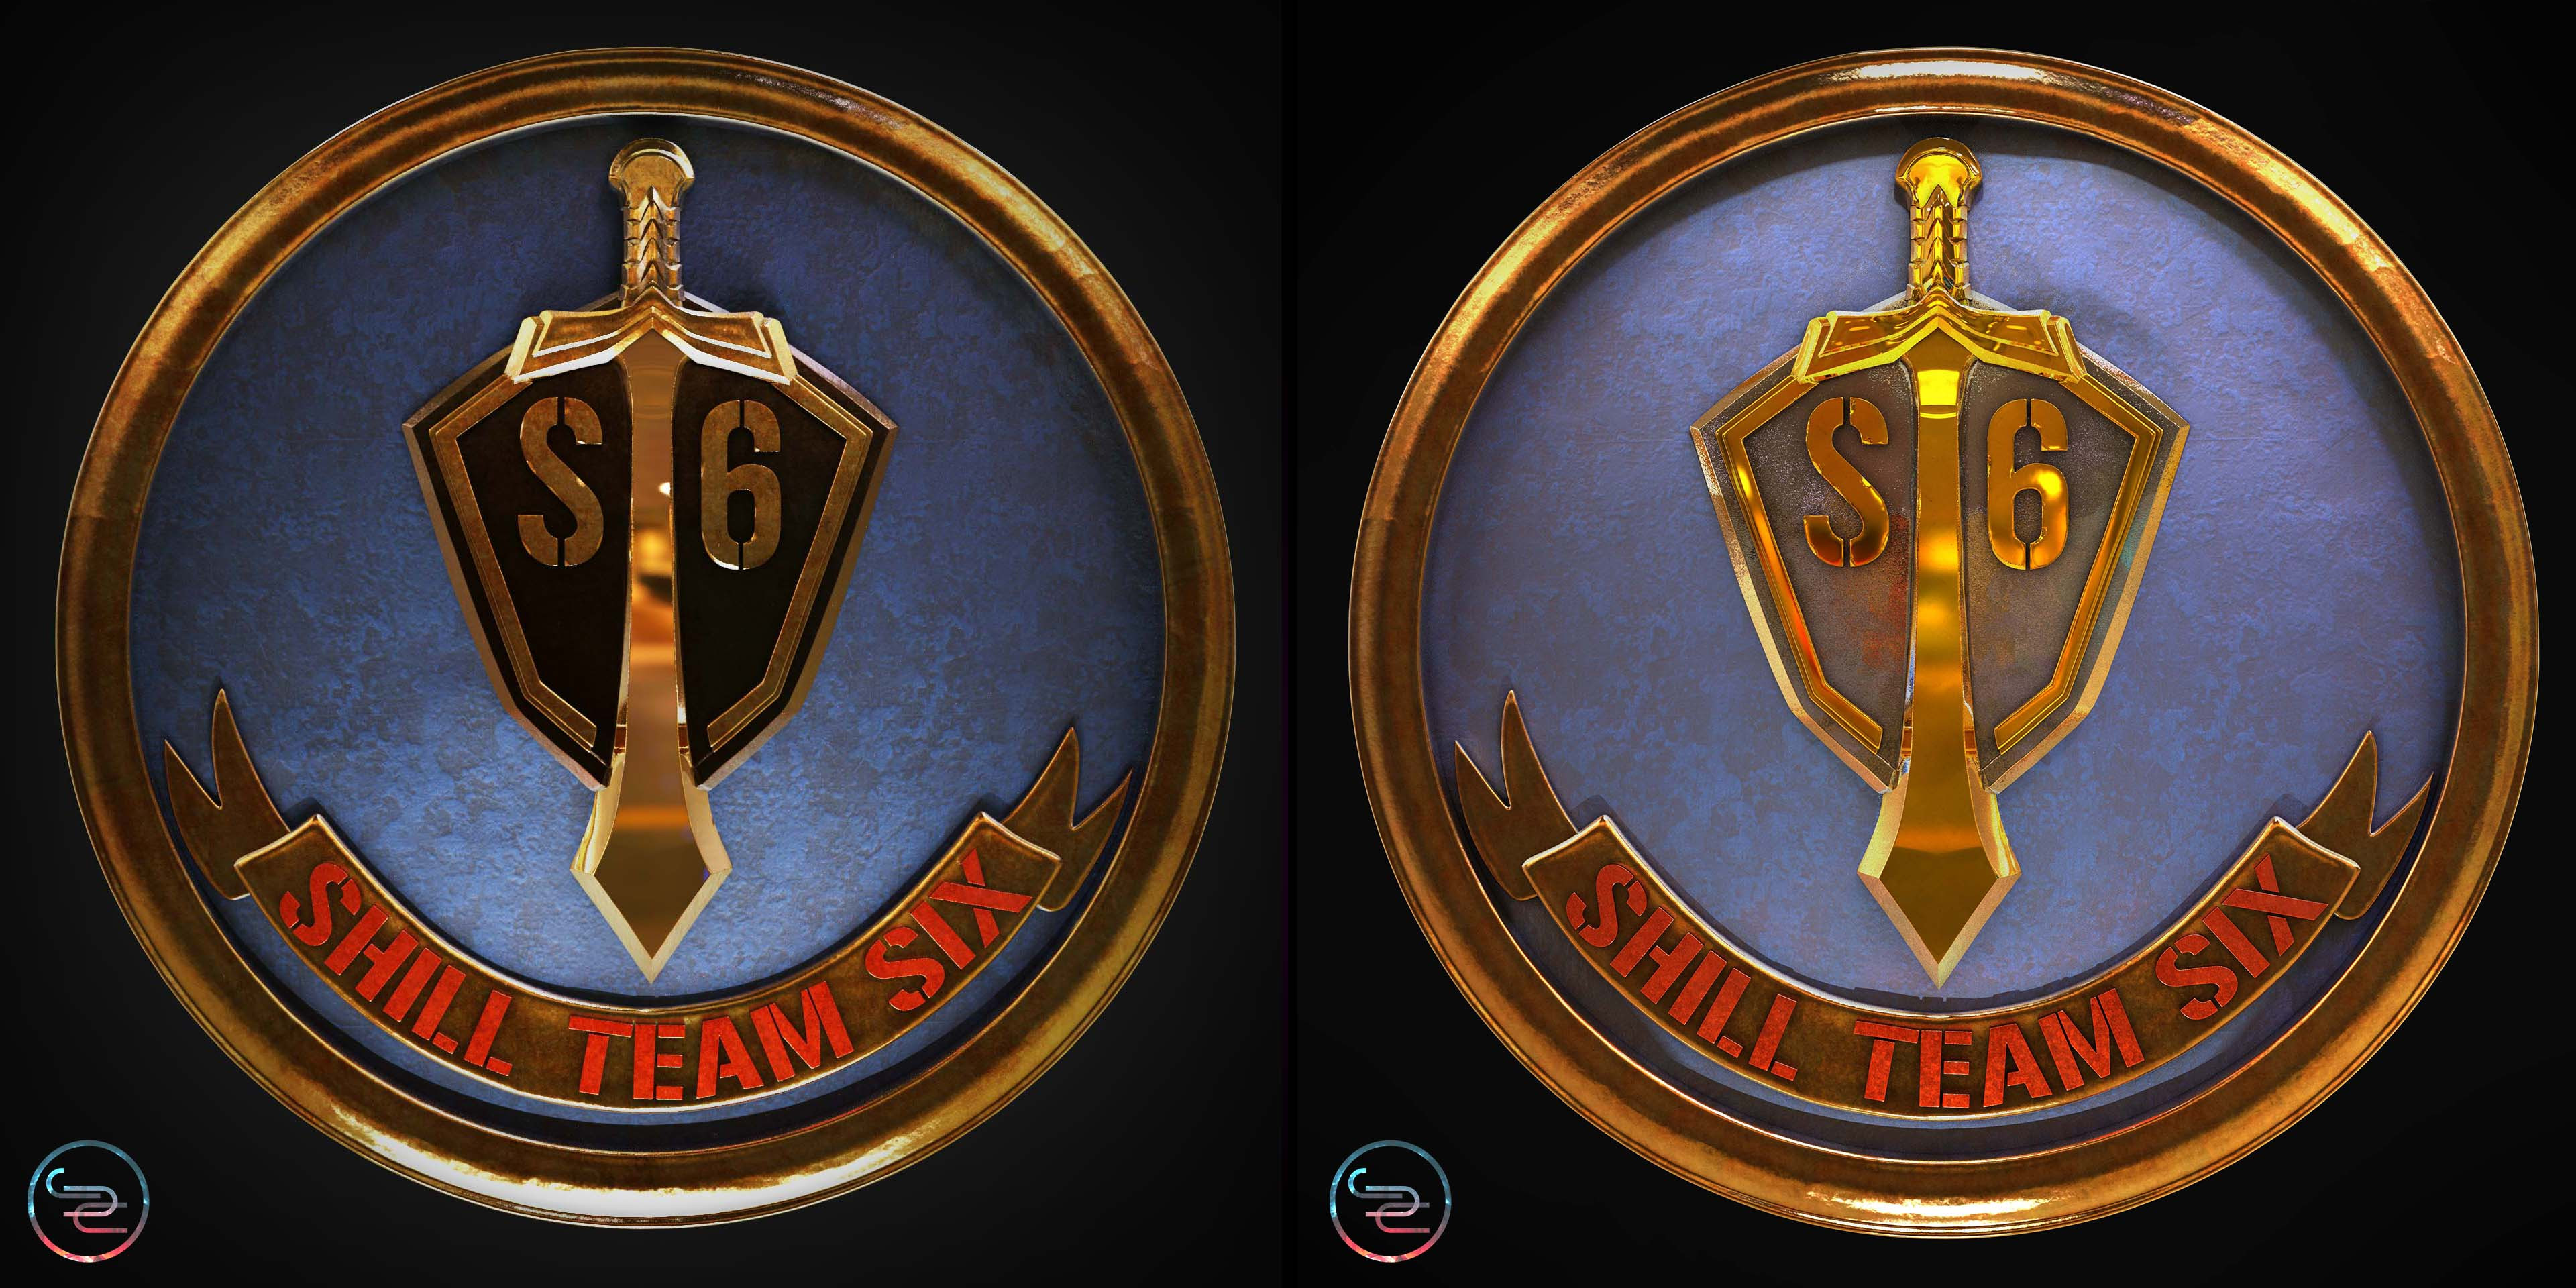 Shill Team Six - 3D Emblem for a private group project. 